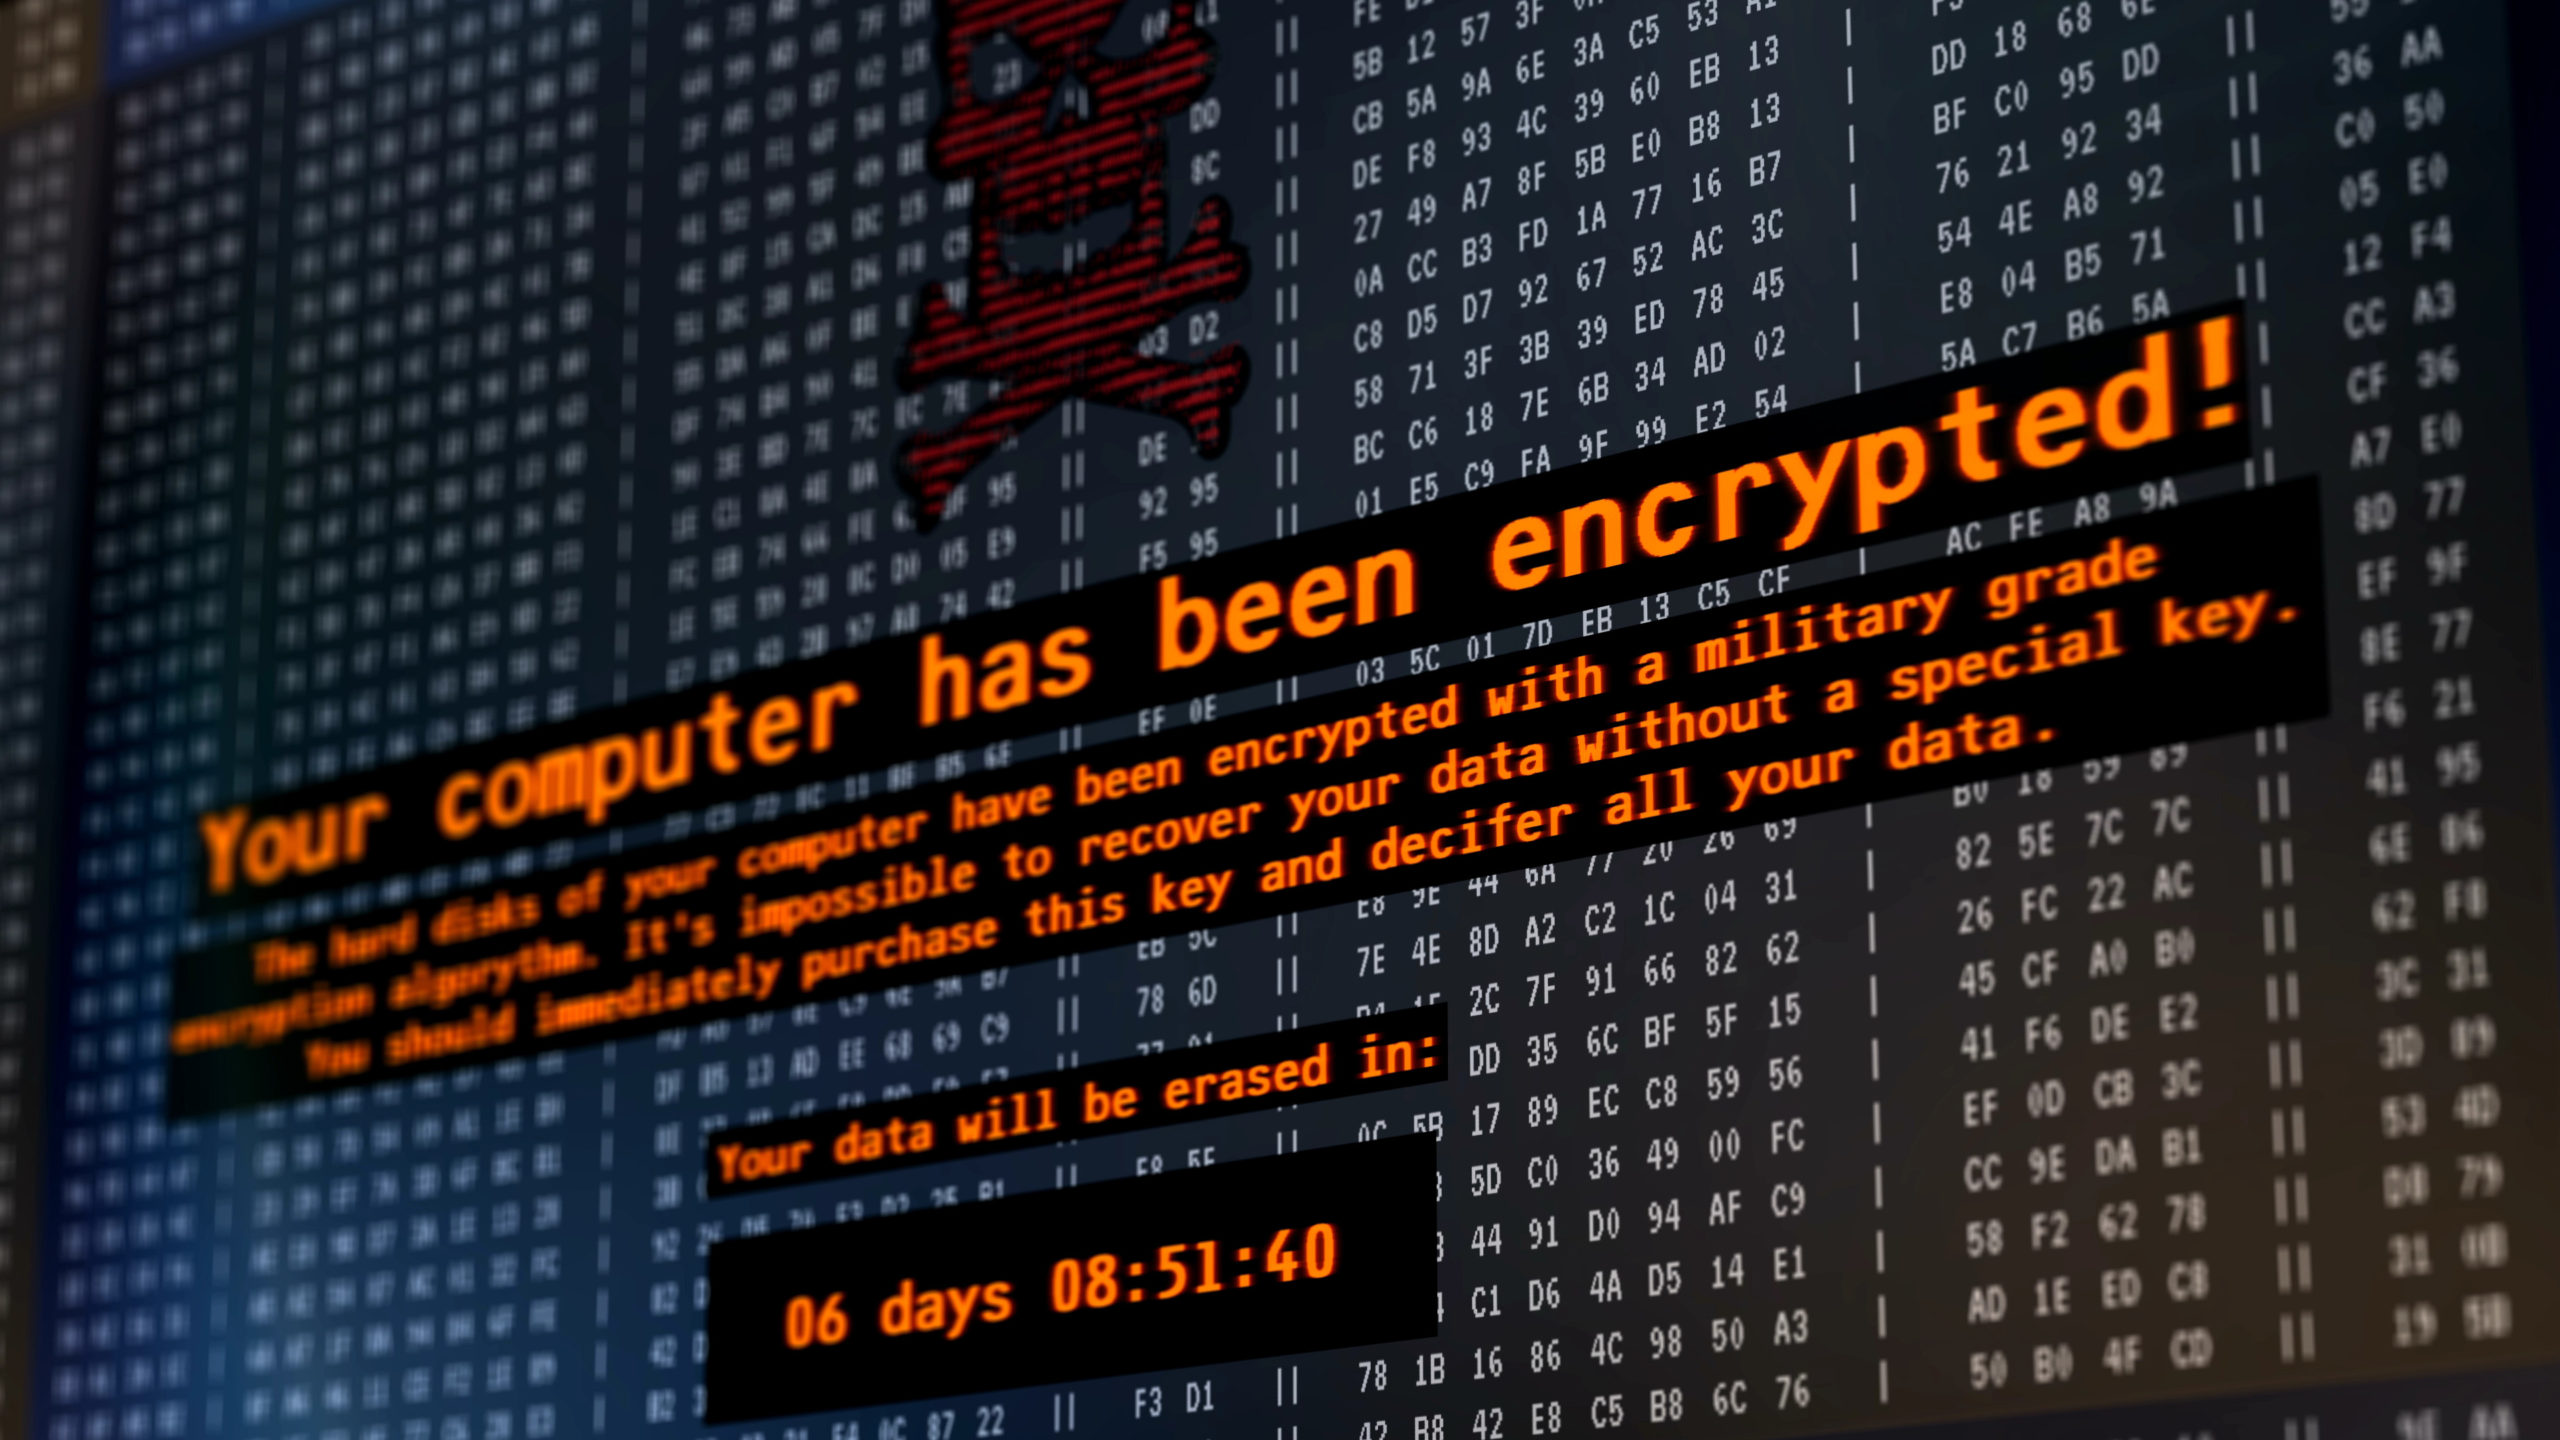 Malware warning message with headline “Your computer has been encrypted!” displayed on a computer screen.